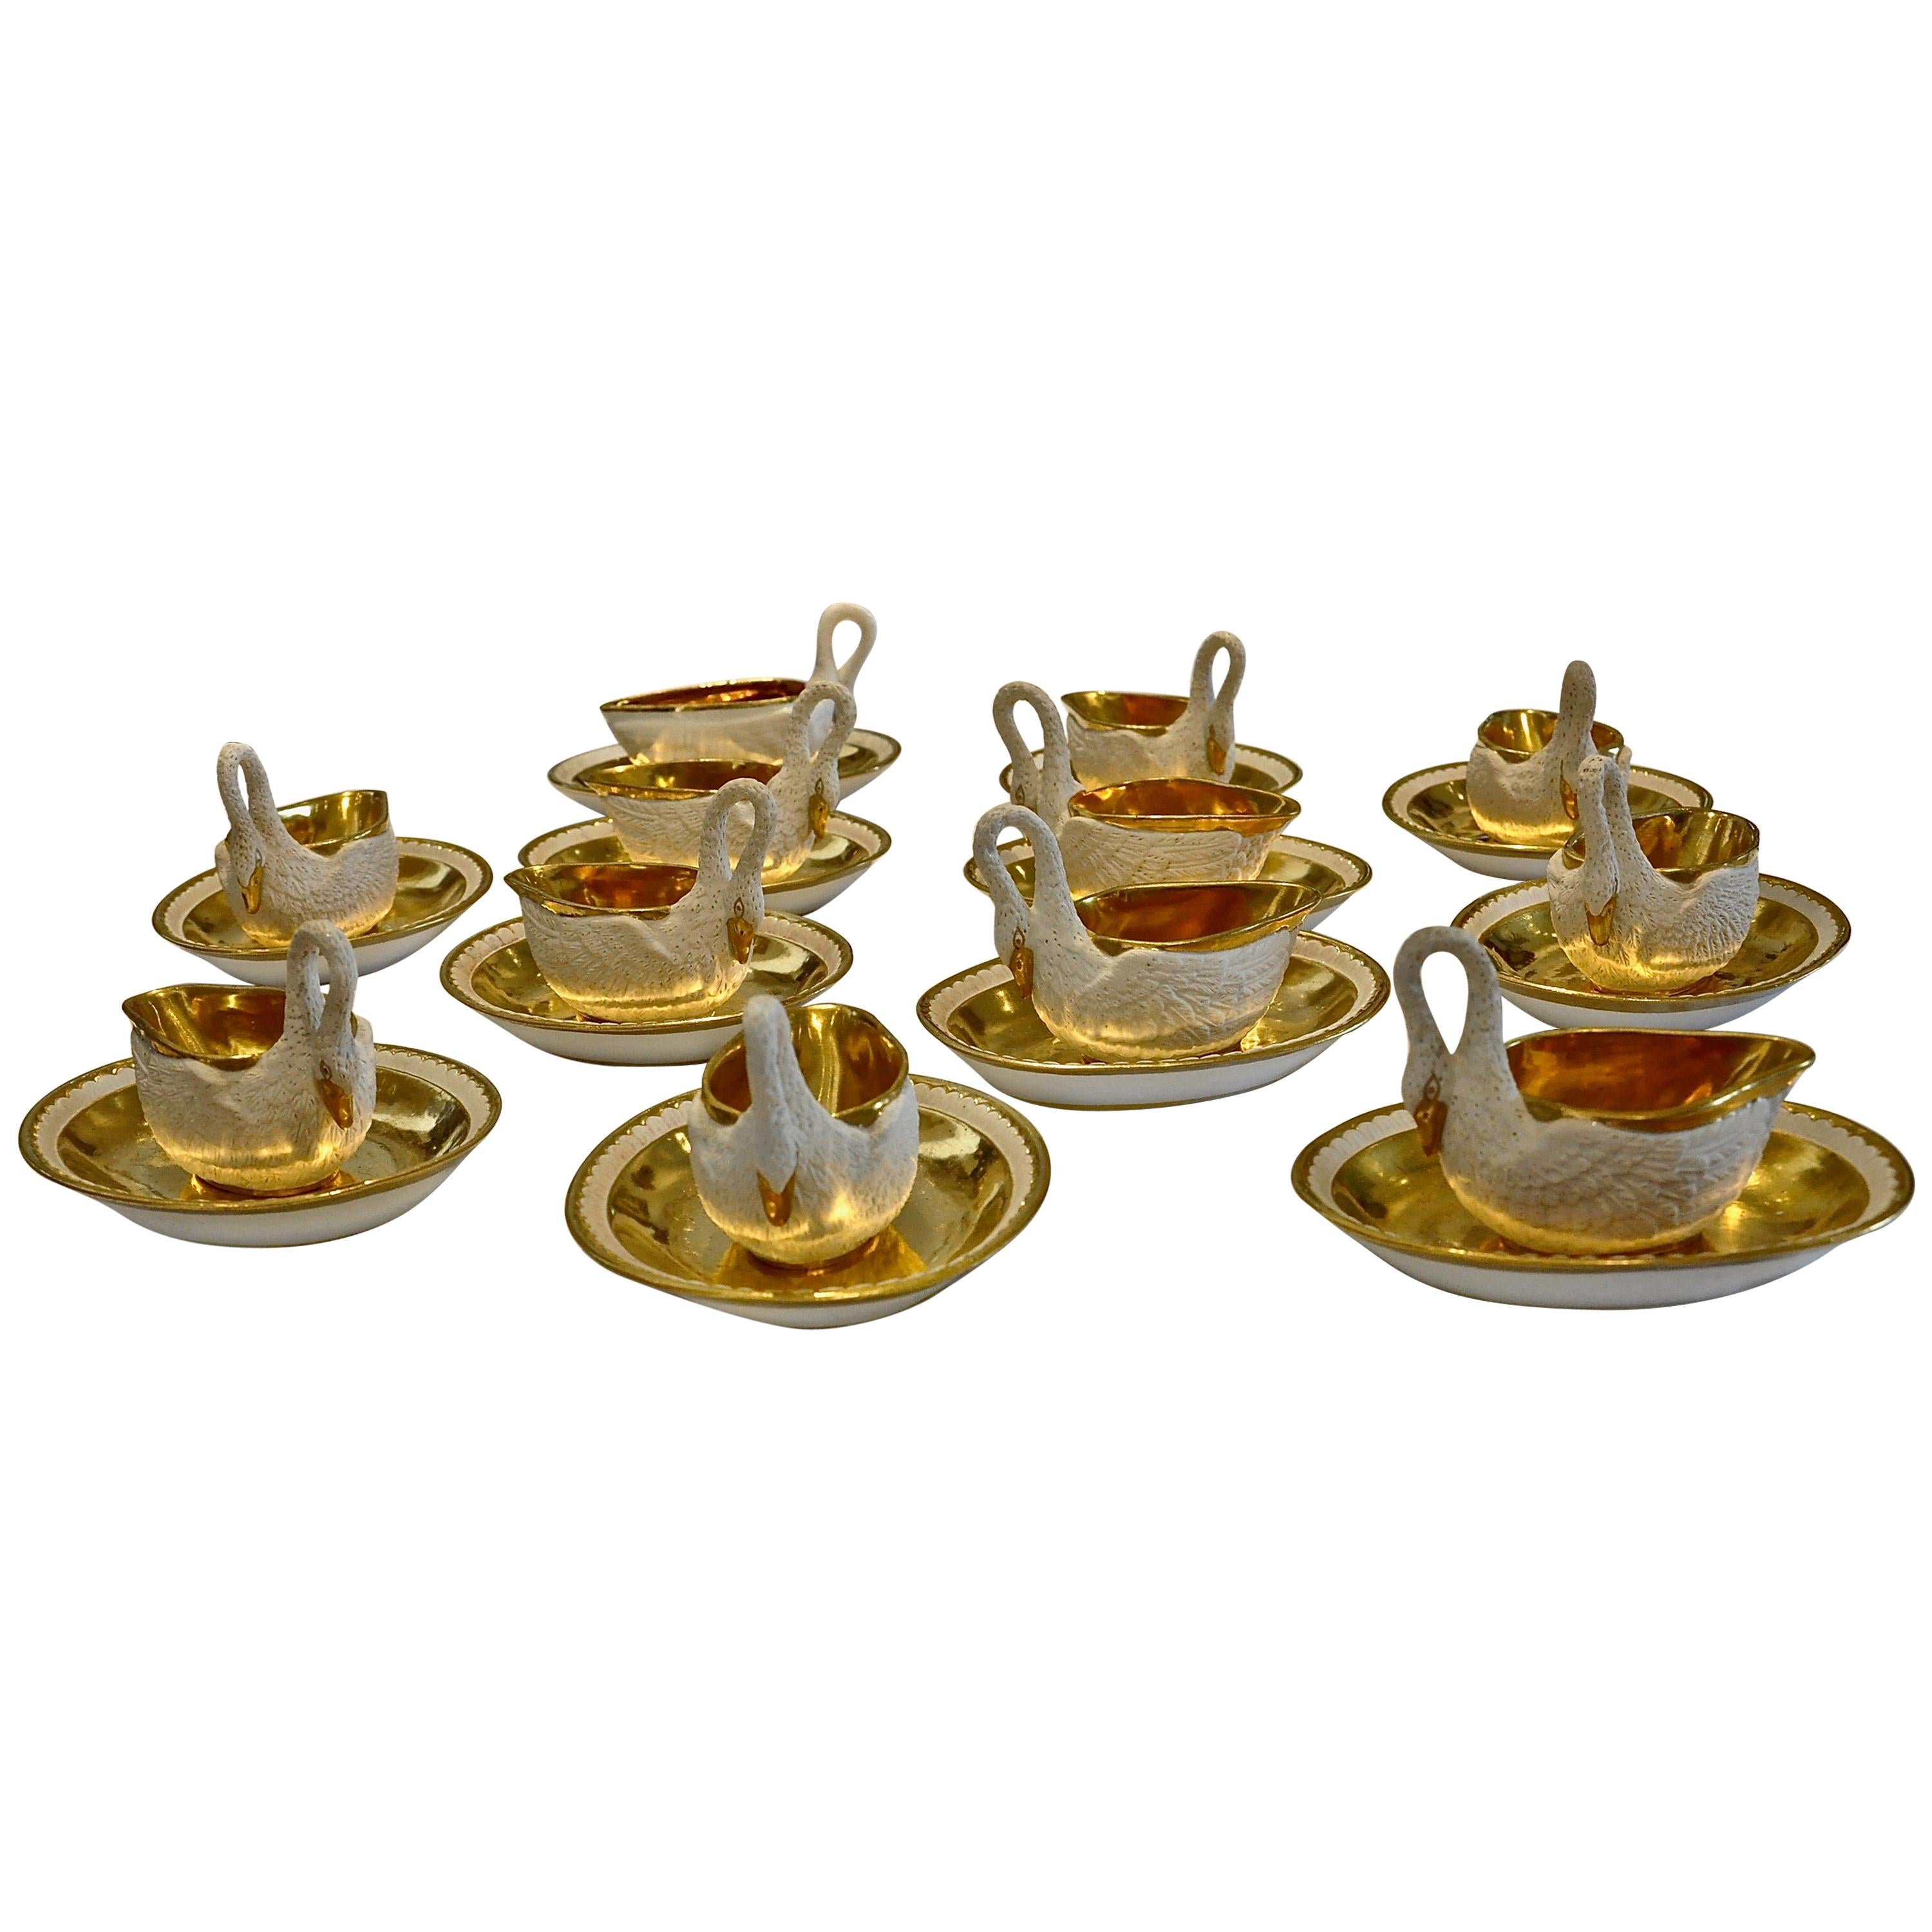 Set of 12 Period Empire Bisque Porcelain and Gilt Swan Cups, Marked Sevres